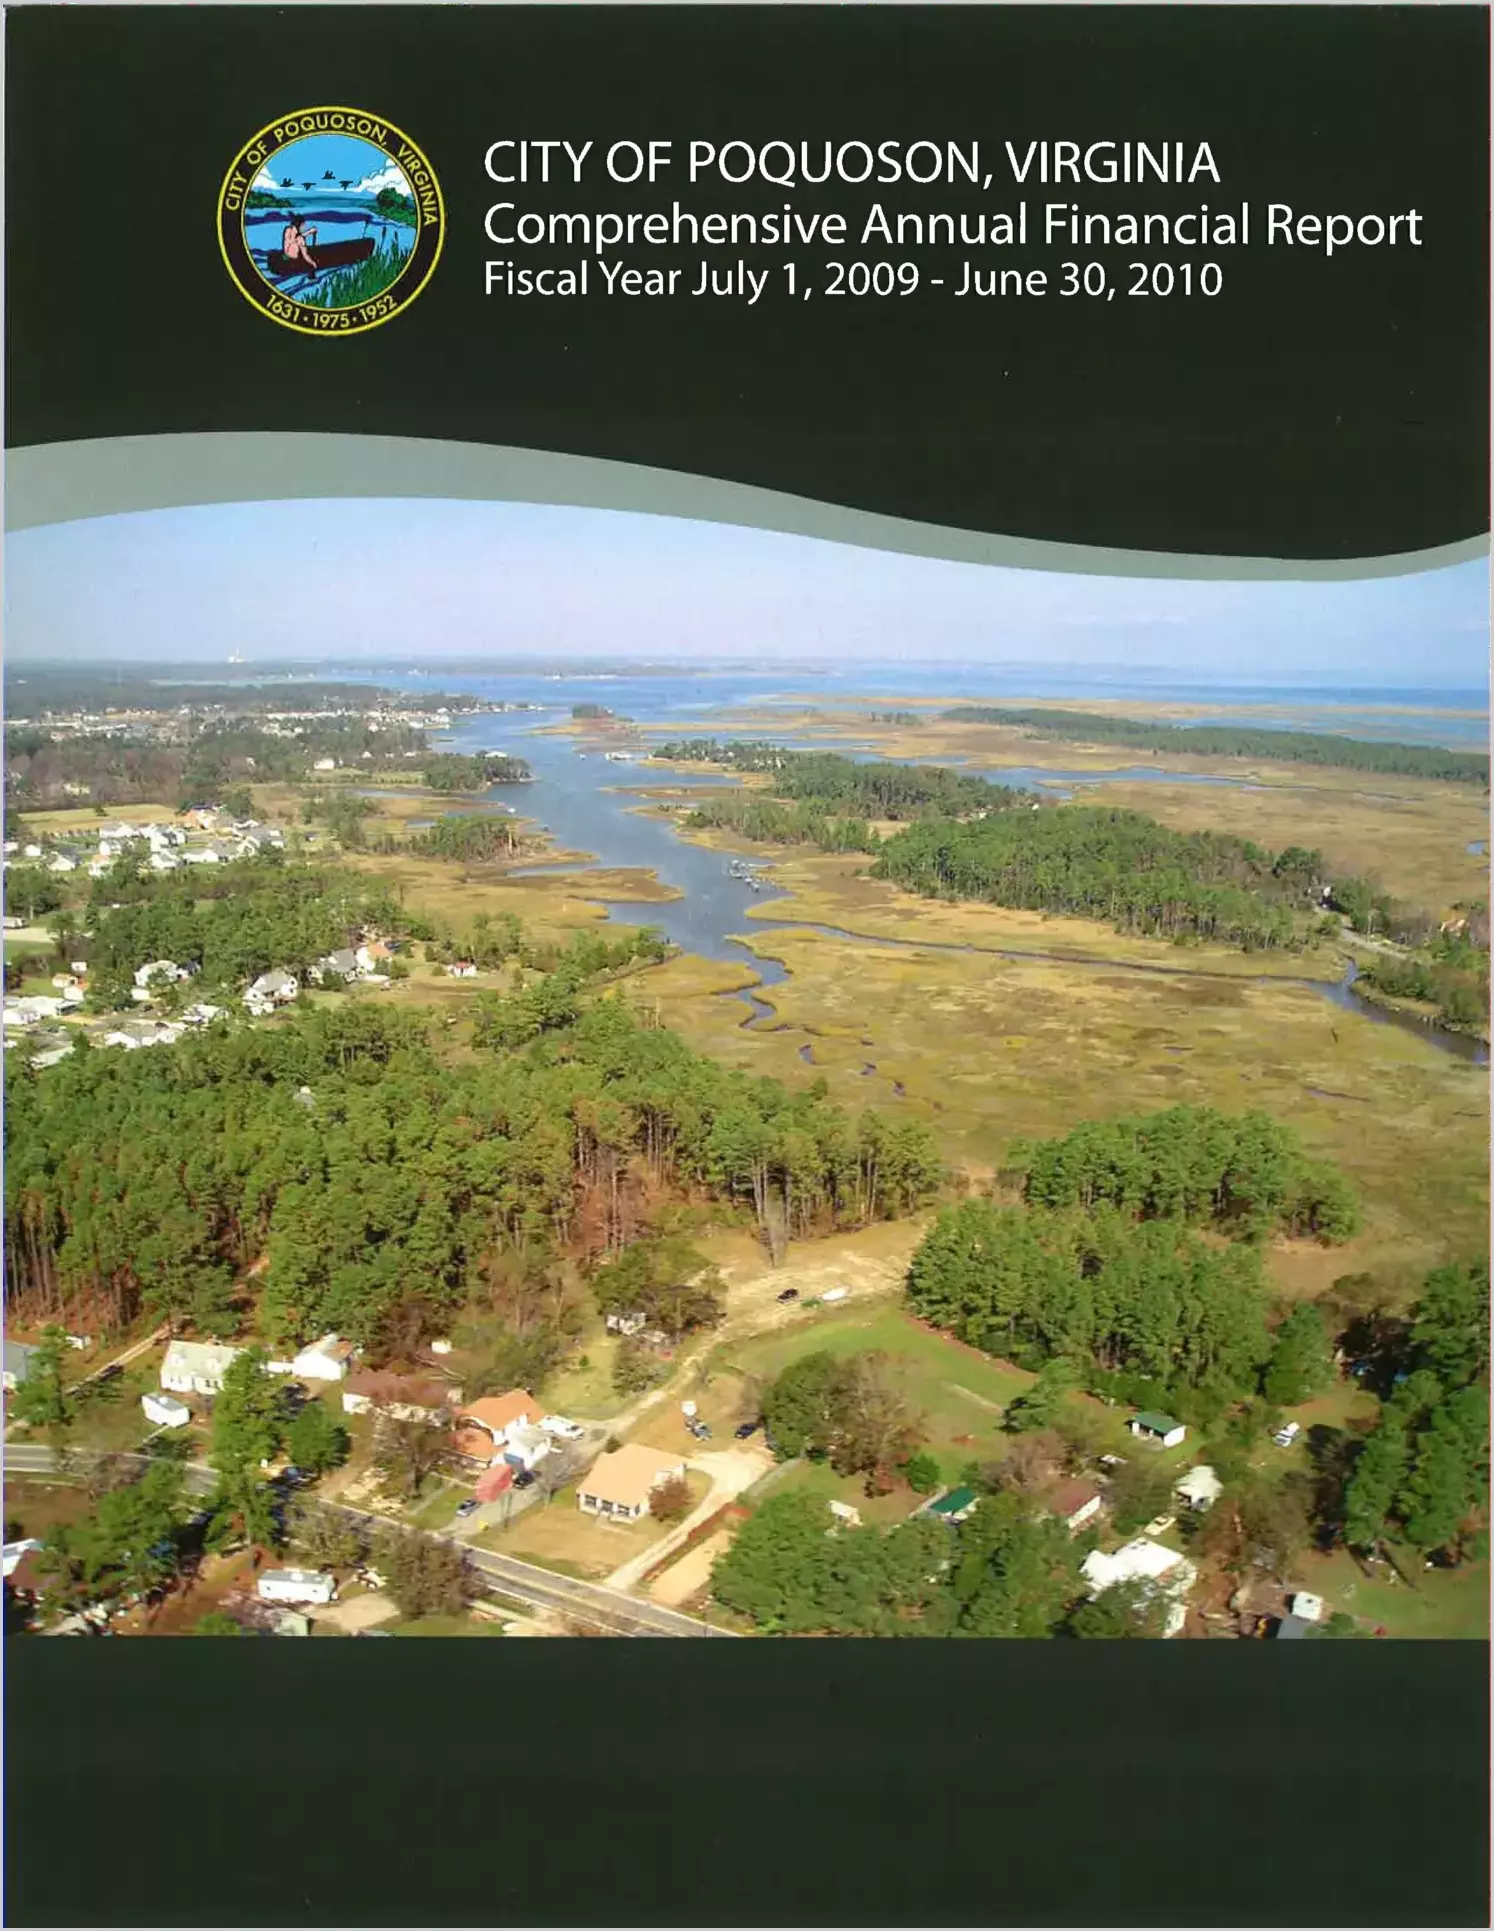 2010 Annual Financial Report for City of Poquoson